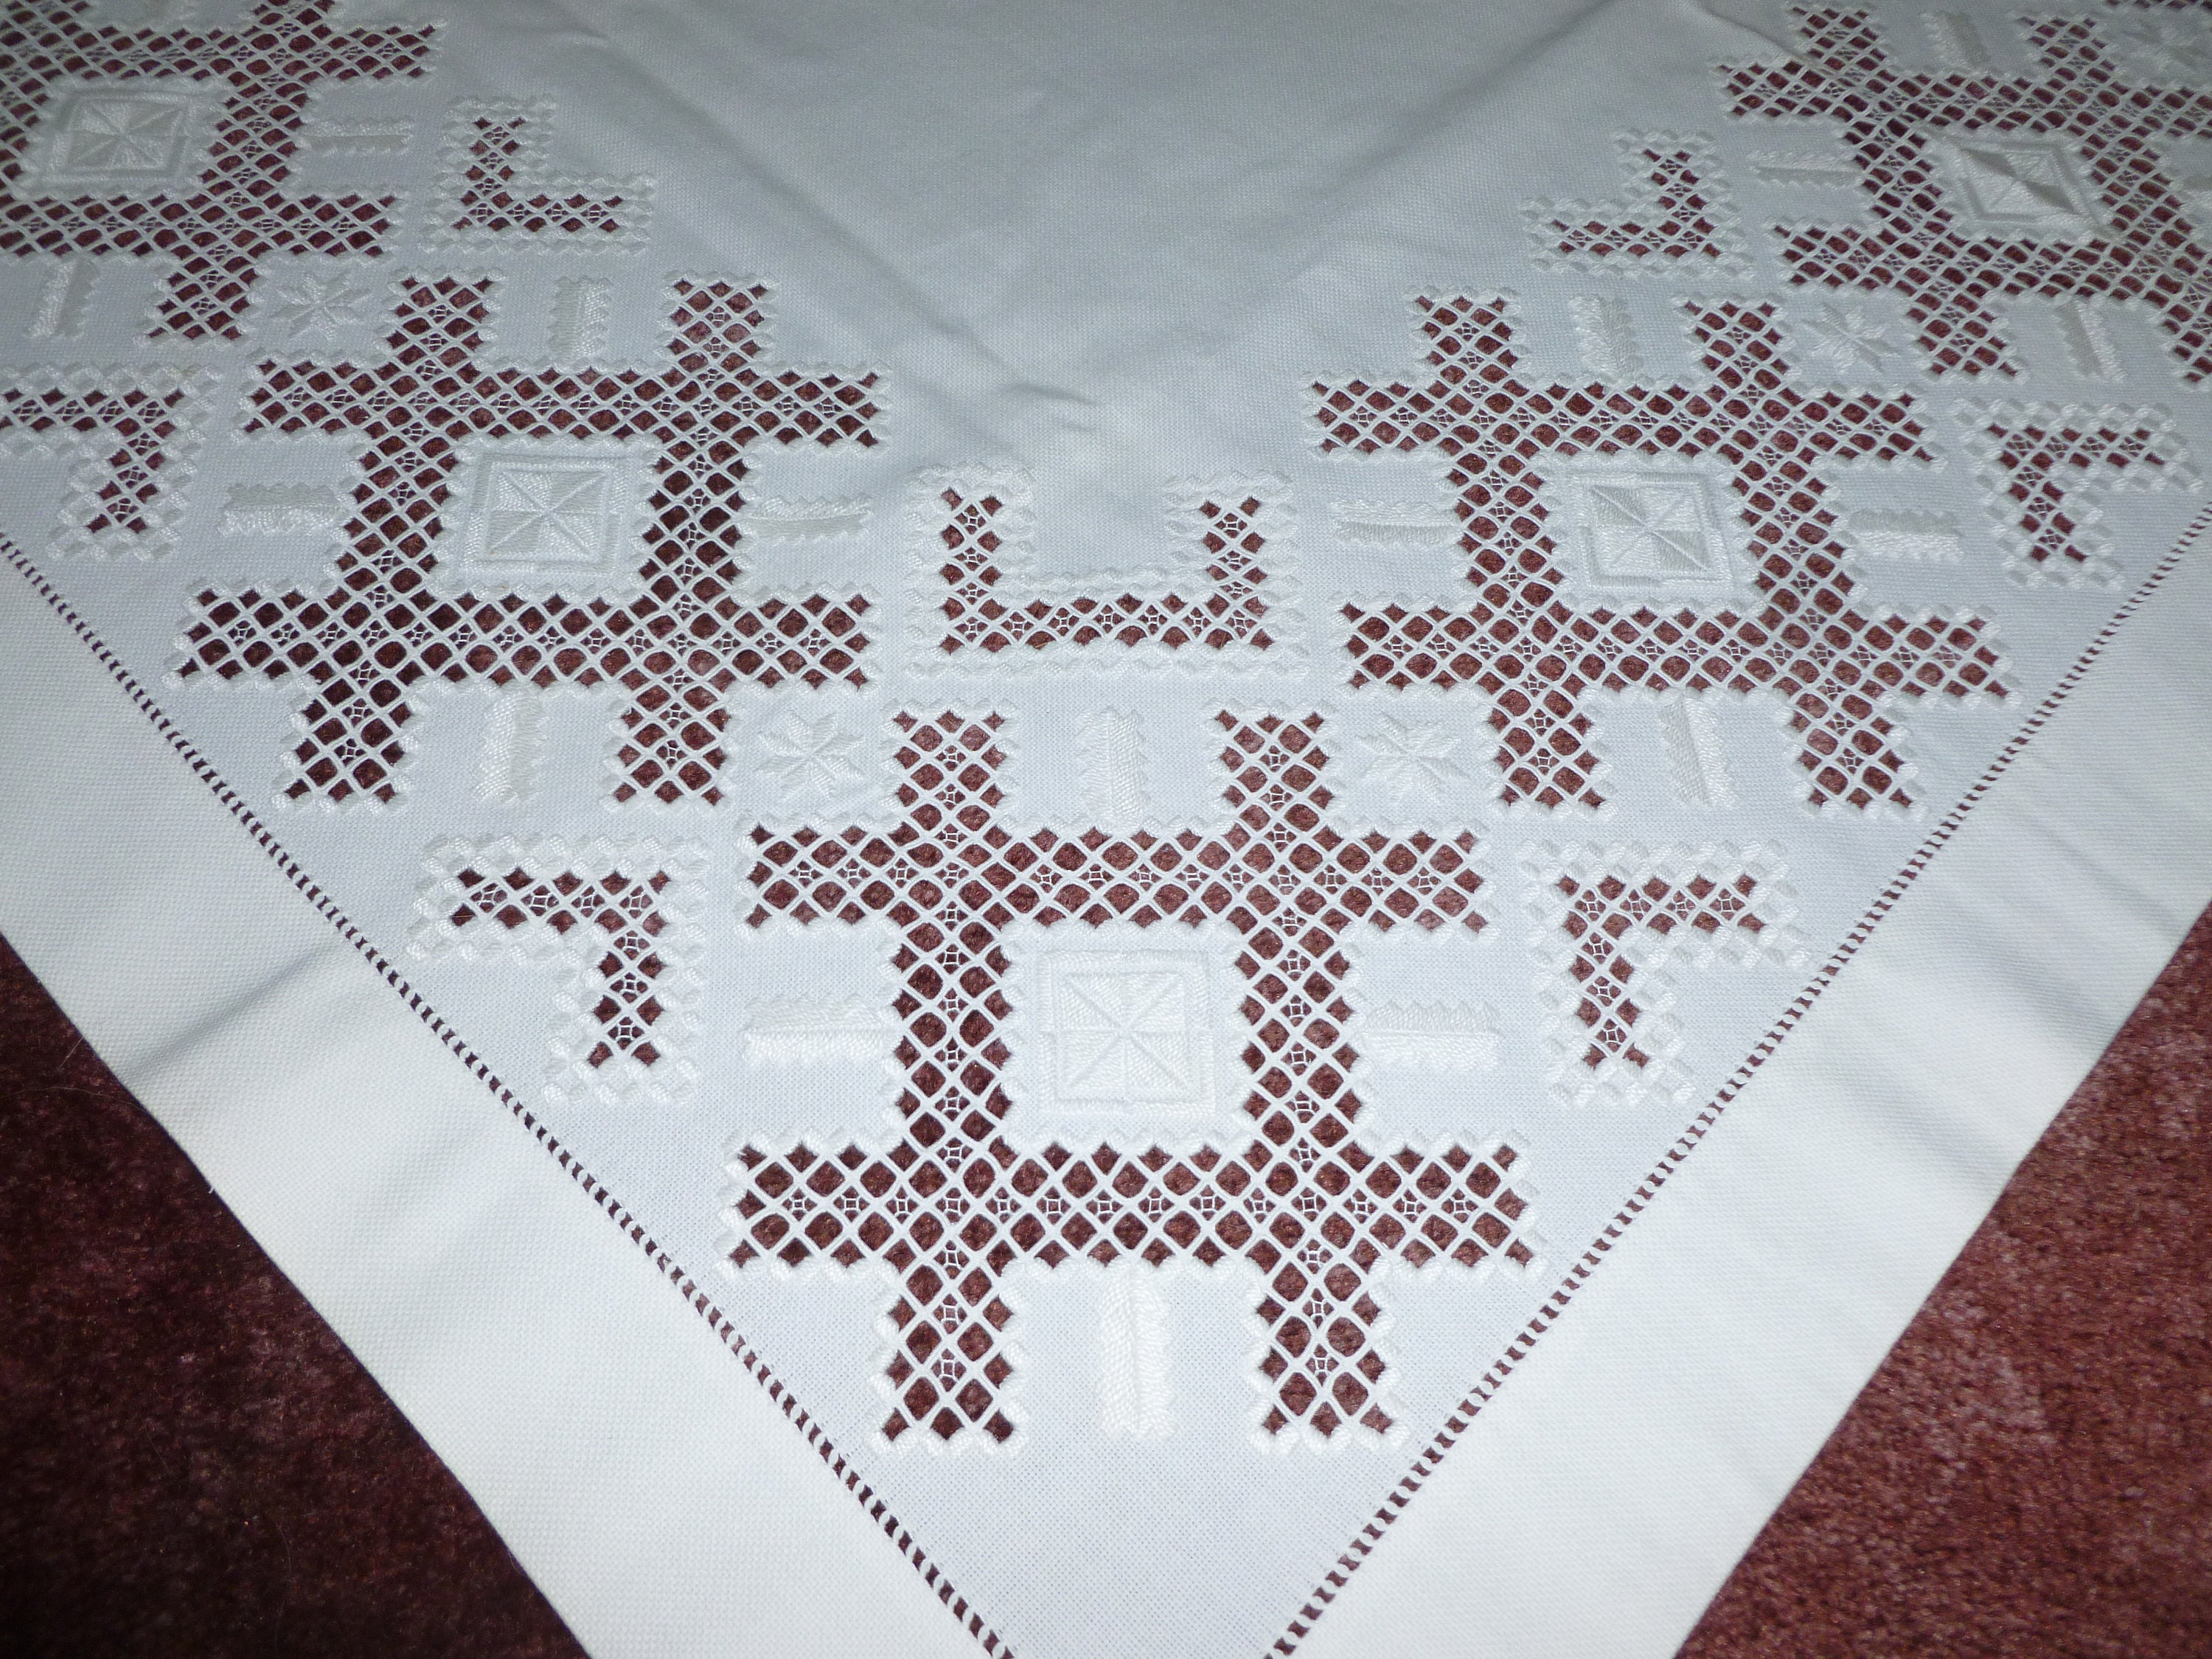 15 Count HARDANGER Fabric, Embroidery Cloth, Embroidery Fabric, Needlework  Cloth, Cross Stich Fabric, Fabric to Embroidery, Sashiko Fabric 